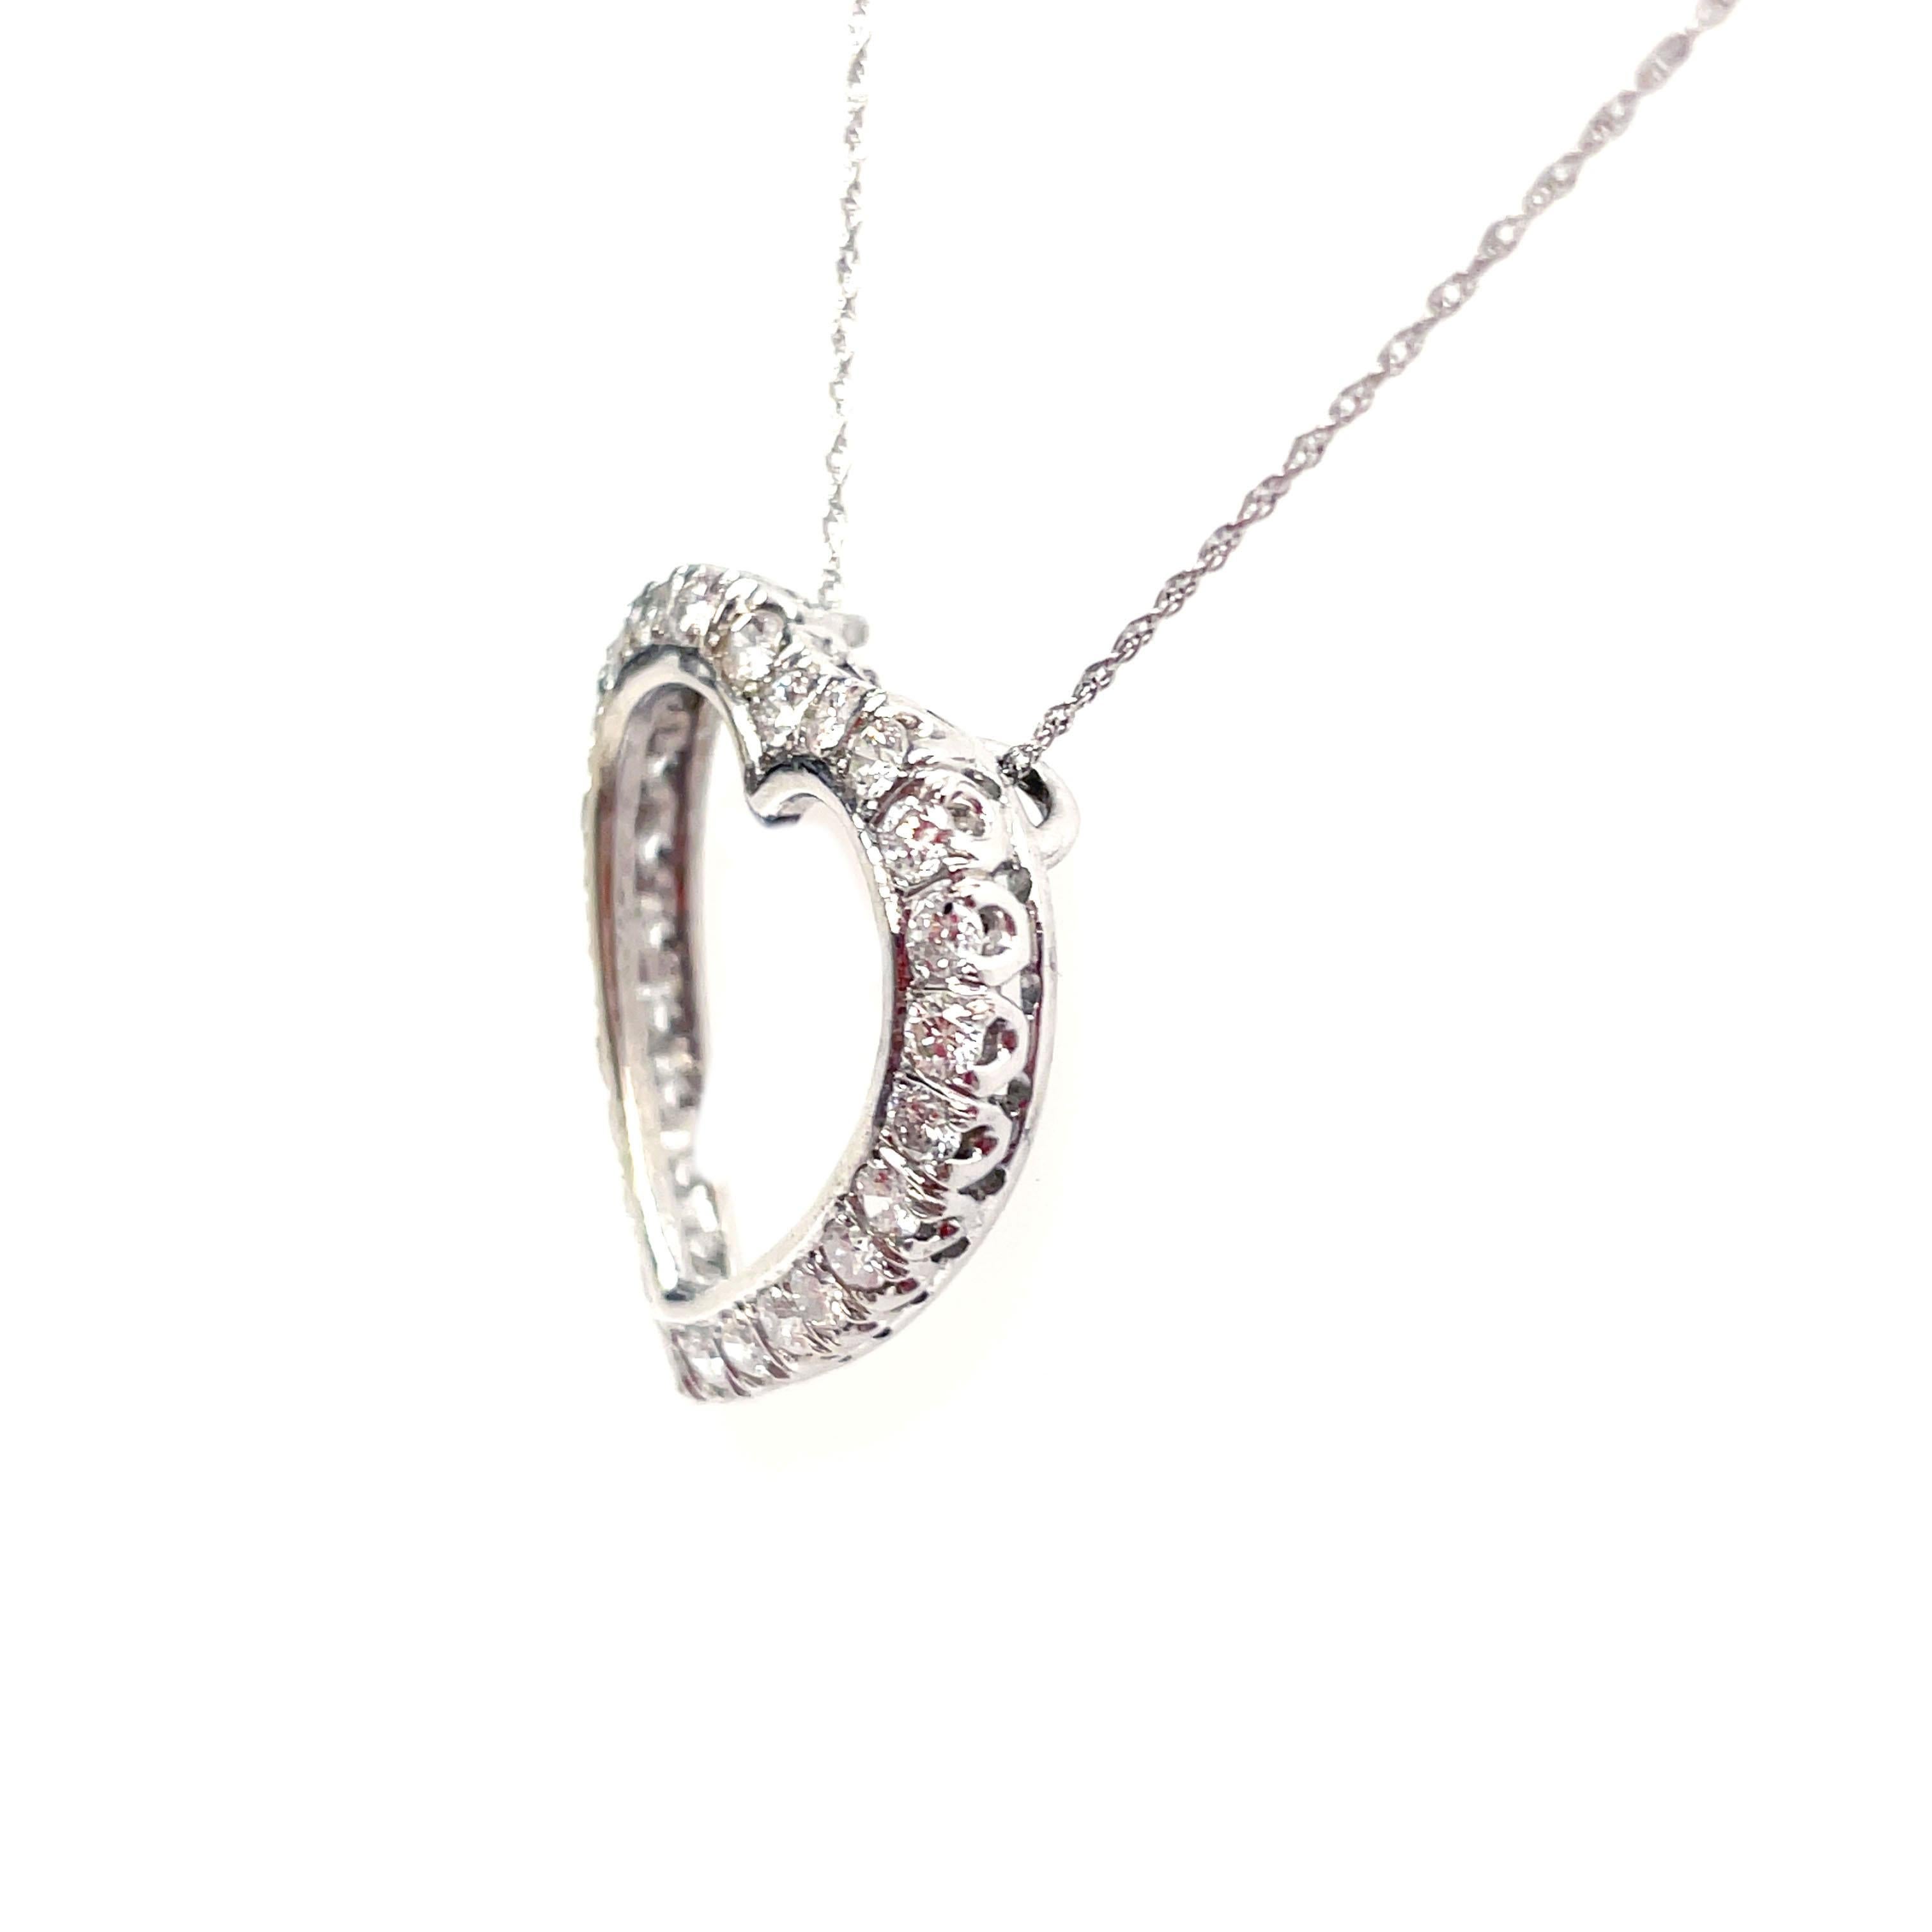 1950s White Gold Diamond Heart Pendant Necklace In Excellent Condition For Sale In Lexington, KY